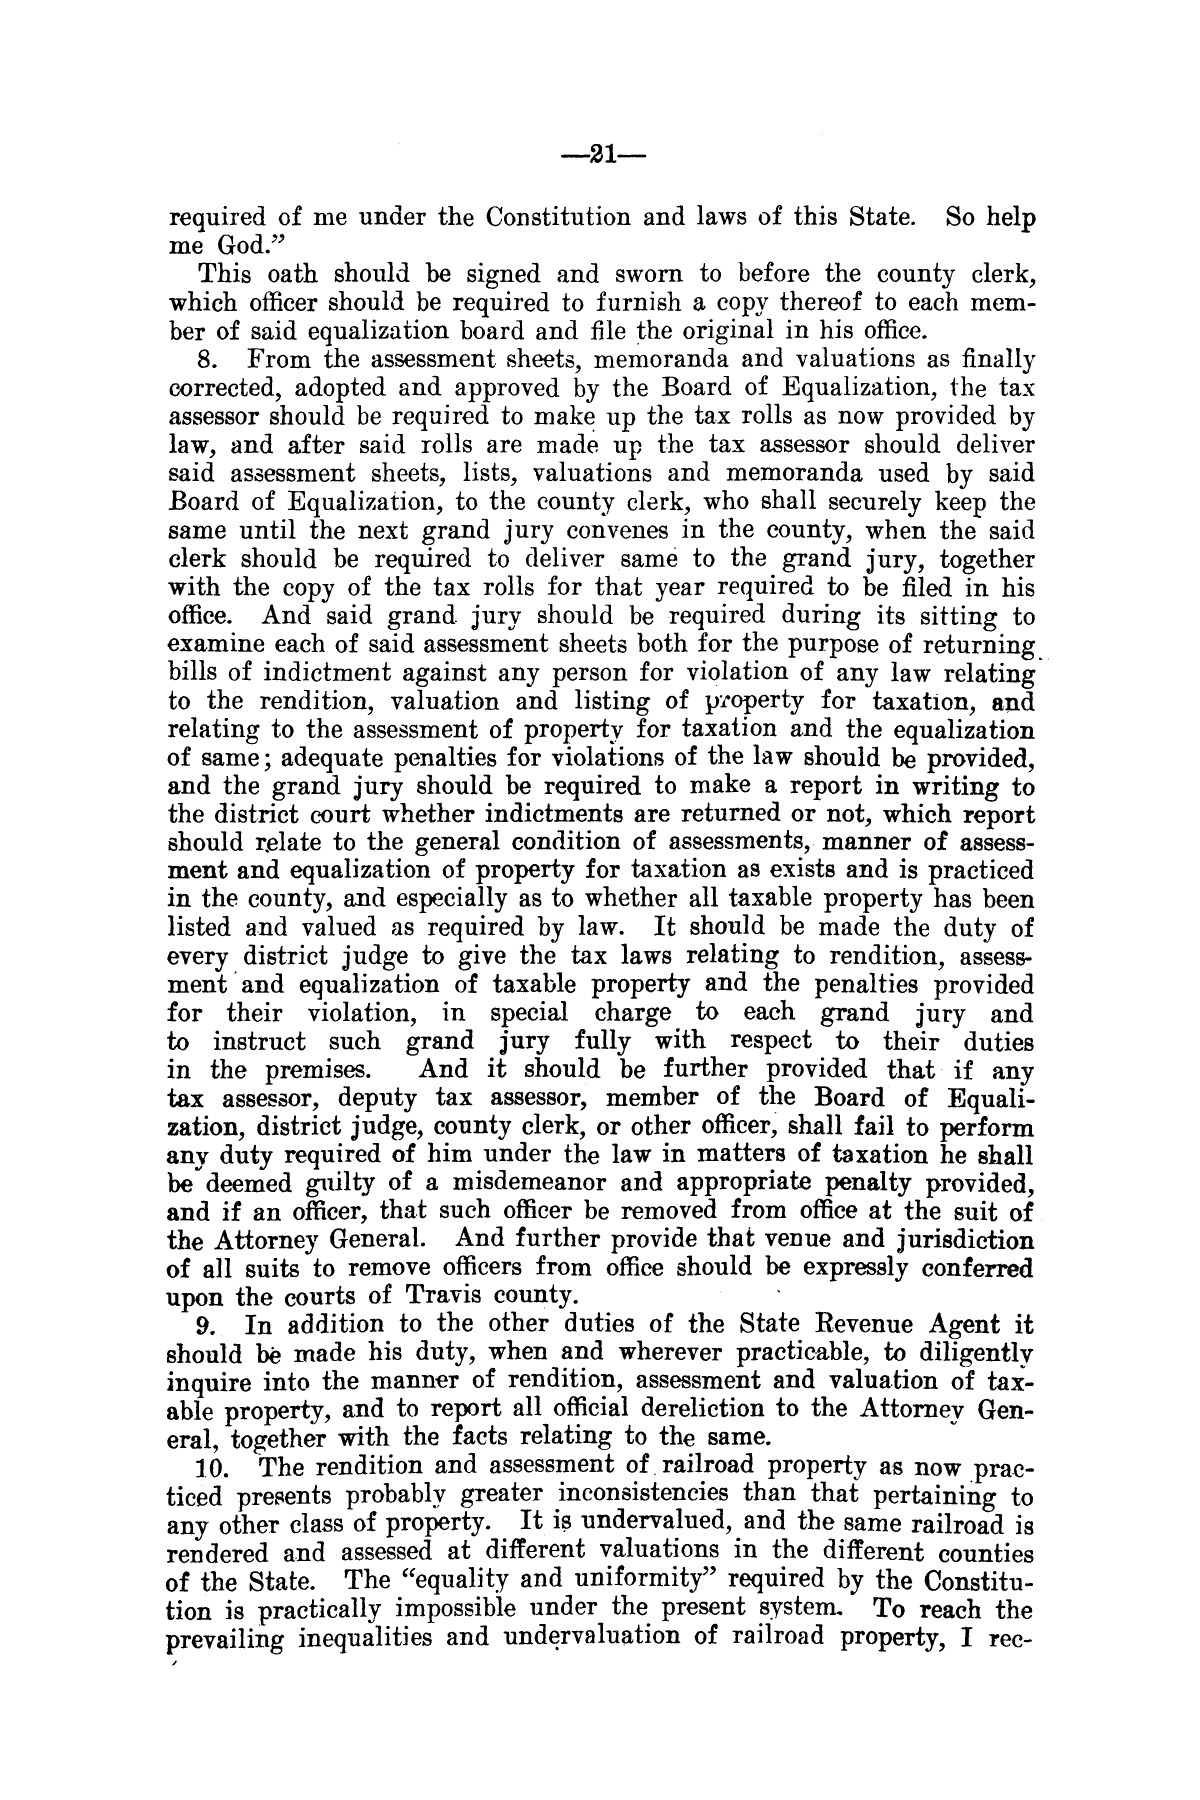 Message of Governor T.M. Campbell to the thirtieth legislature of Texas, to which is appended the State Democratic Platform adopted at Dallas, Texas, August 13, 1906.
                                                
                                                    [Sequence #]: 21 of 27
                                                